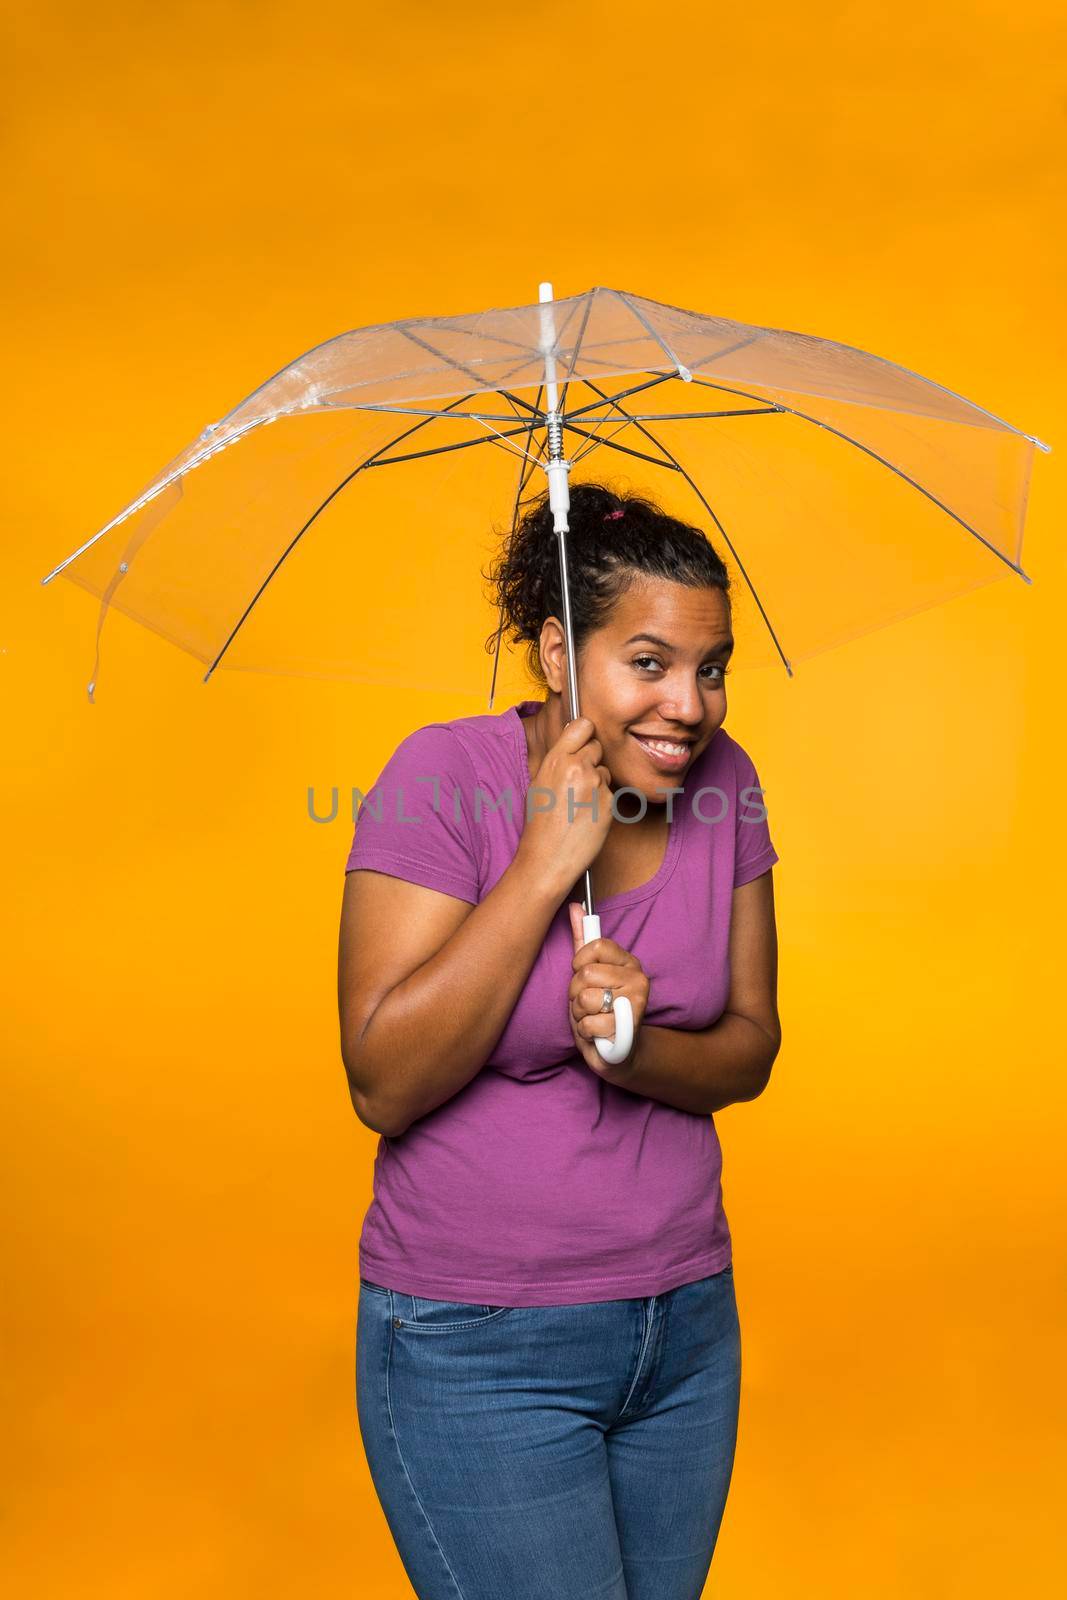 young attractive mixed race woman holding an umbrella wearing a purple shirt against a yellow background by LeoniekvanderVliet